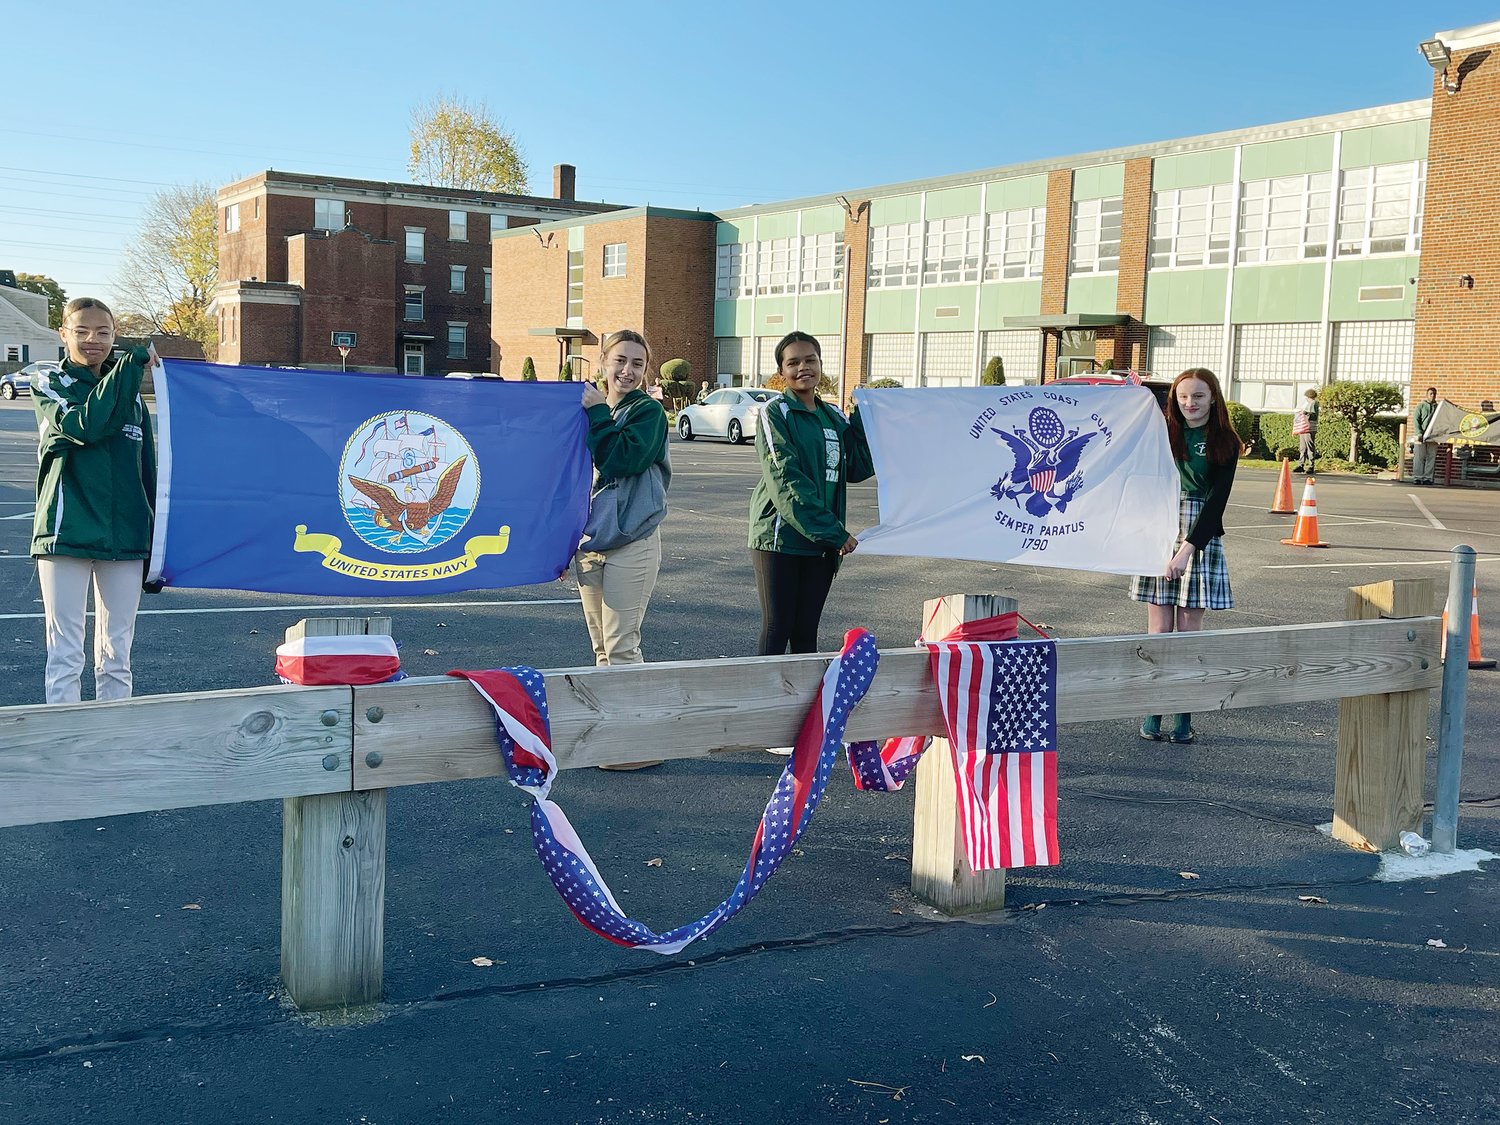 On November 10, students from Saint Teresa School in Pawtucket paid special tribute to the American veterans who have so heroically defended and served the country. Middle school students formed an honor guard to greet each student and parent as they arrived at school this morning. For the rest of the day students made ornaments for a veterans’ group and for the month of November the school community will collect warm clothing and food for veterans.